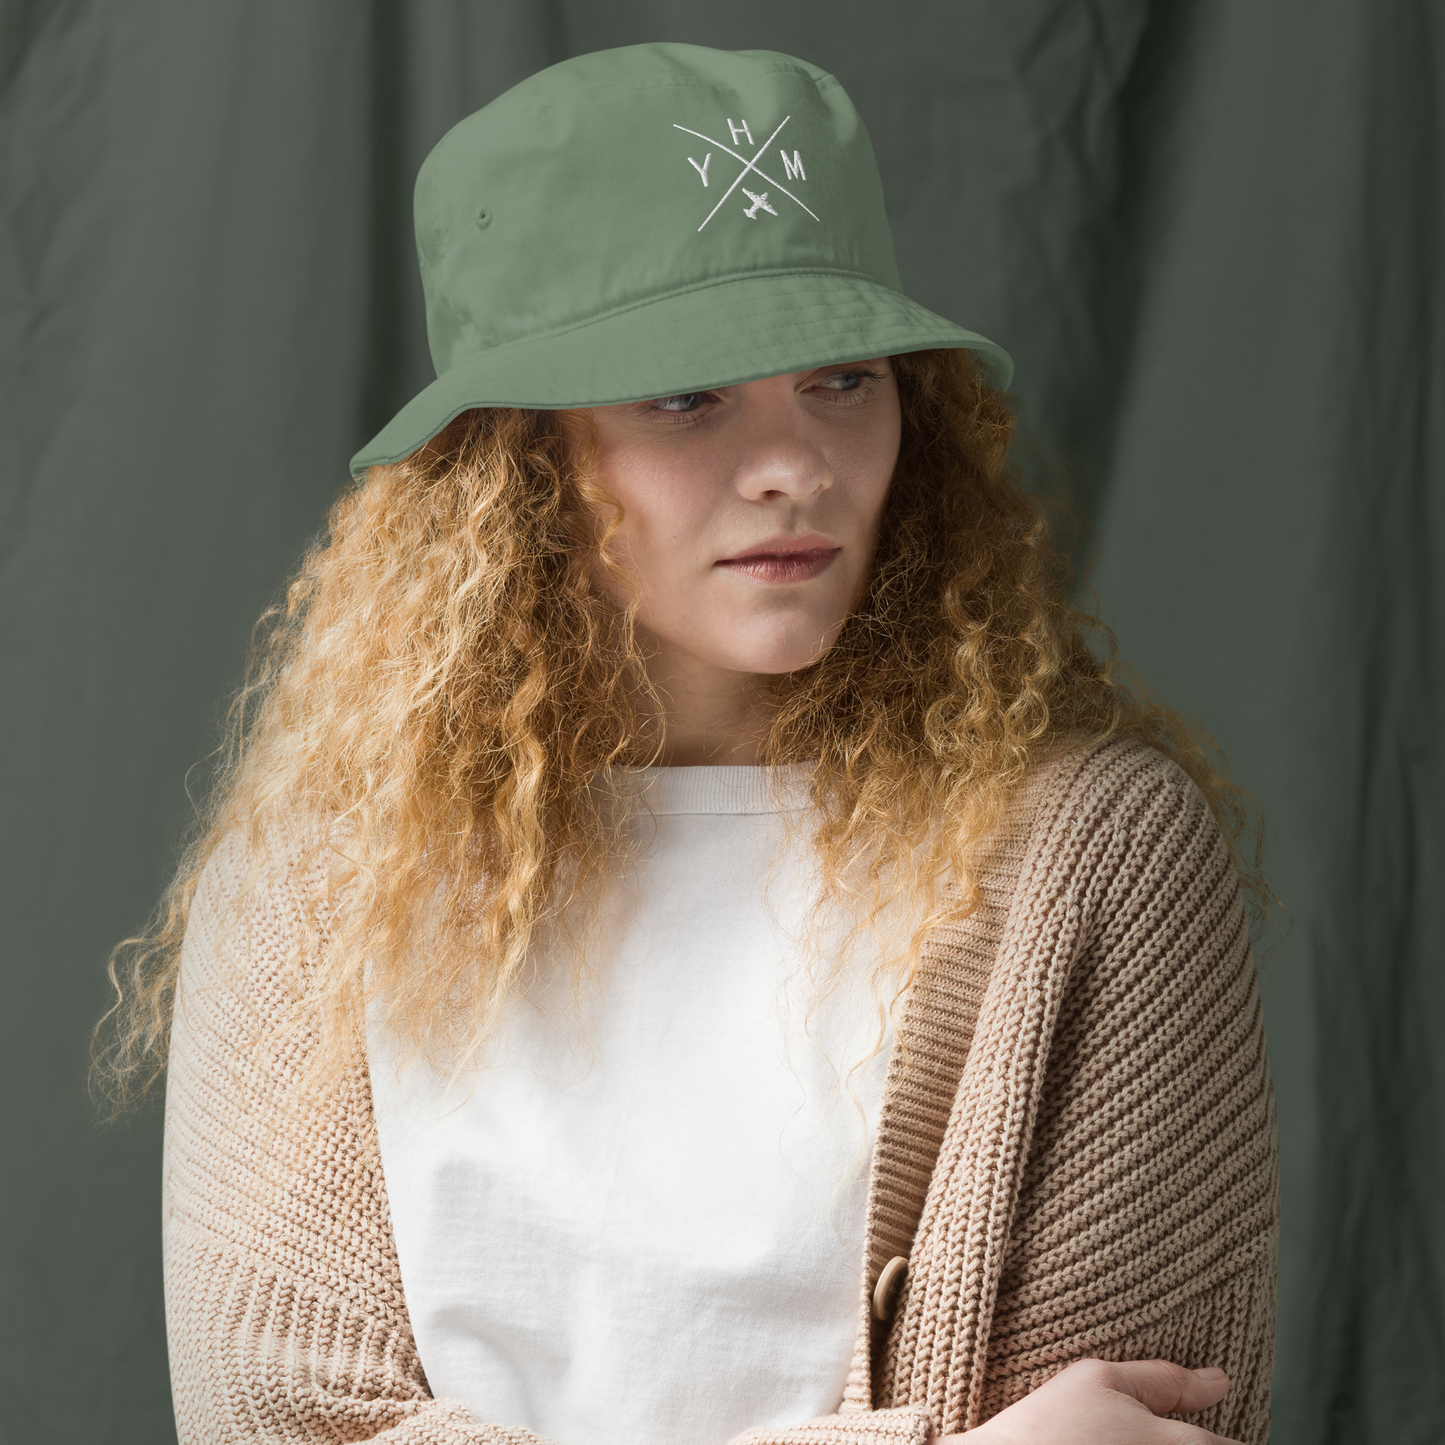 Crossed-X Organic Bucket Hat • White Embroidery